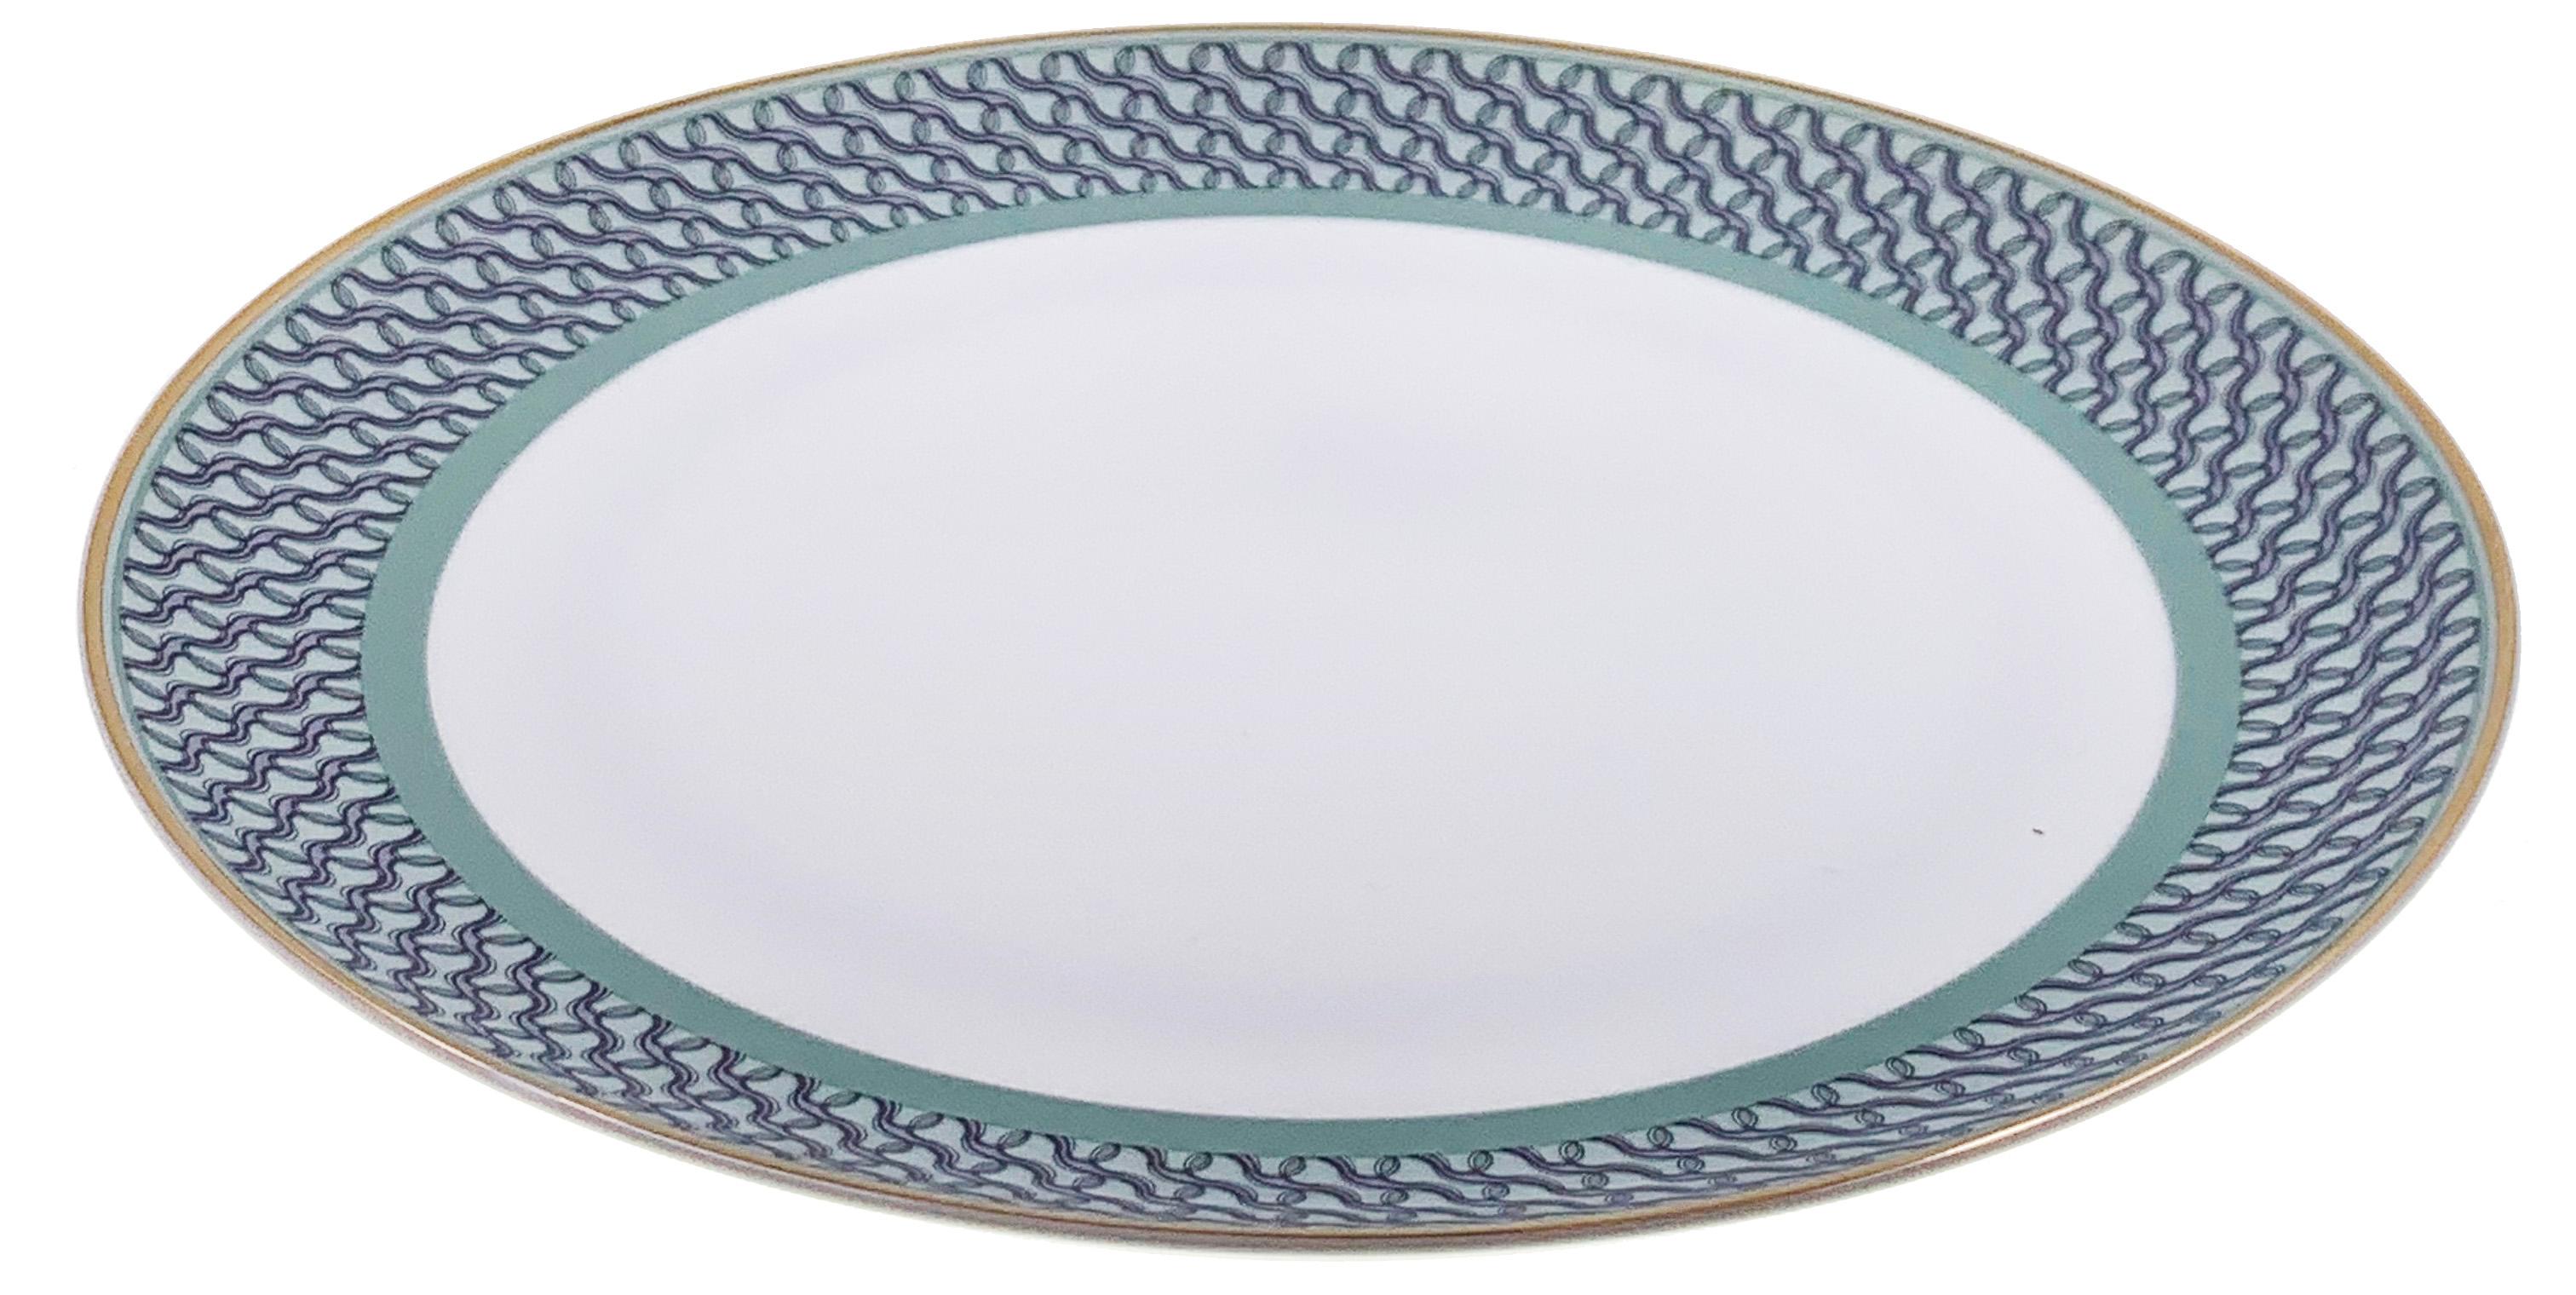 Larger quantities available upon request, with 8 weeks production time.

Description: Set of 2 dinner plate with ring pattern (2 pieces)
Color: Sage green
Size: 26.5Ø x 2.5H cm
Material: Porcelain and gold
Collection: Mid Century Rhythm